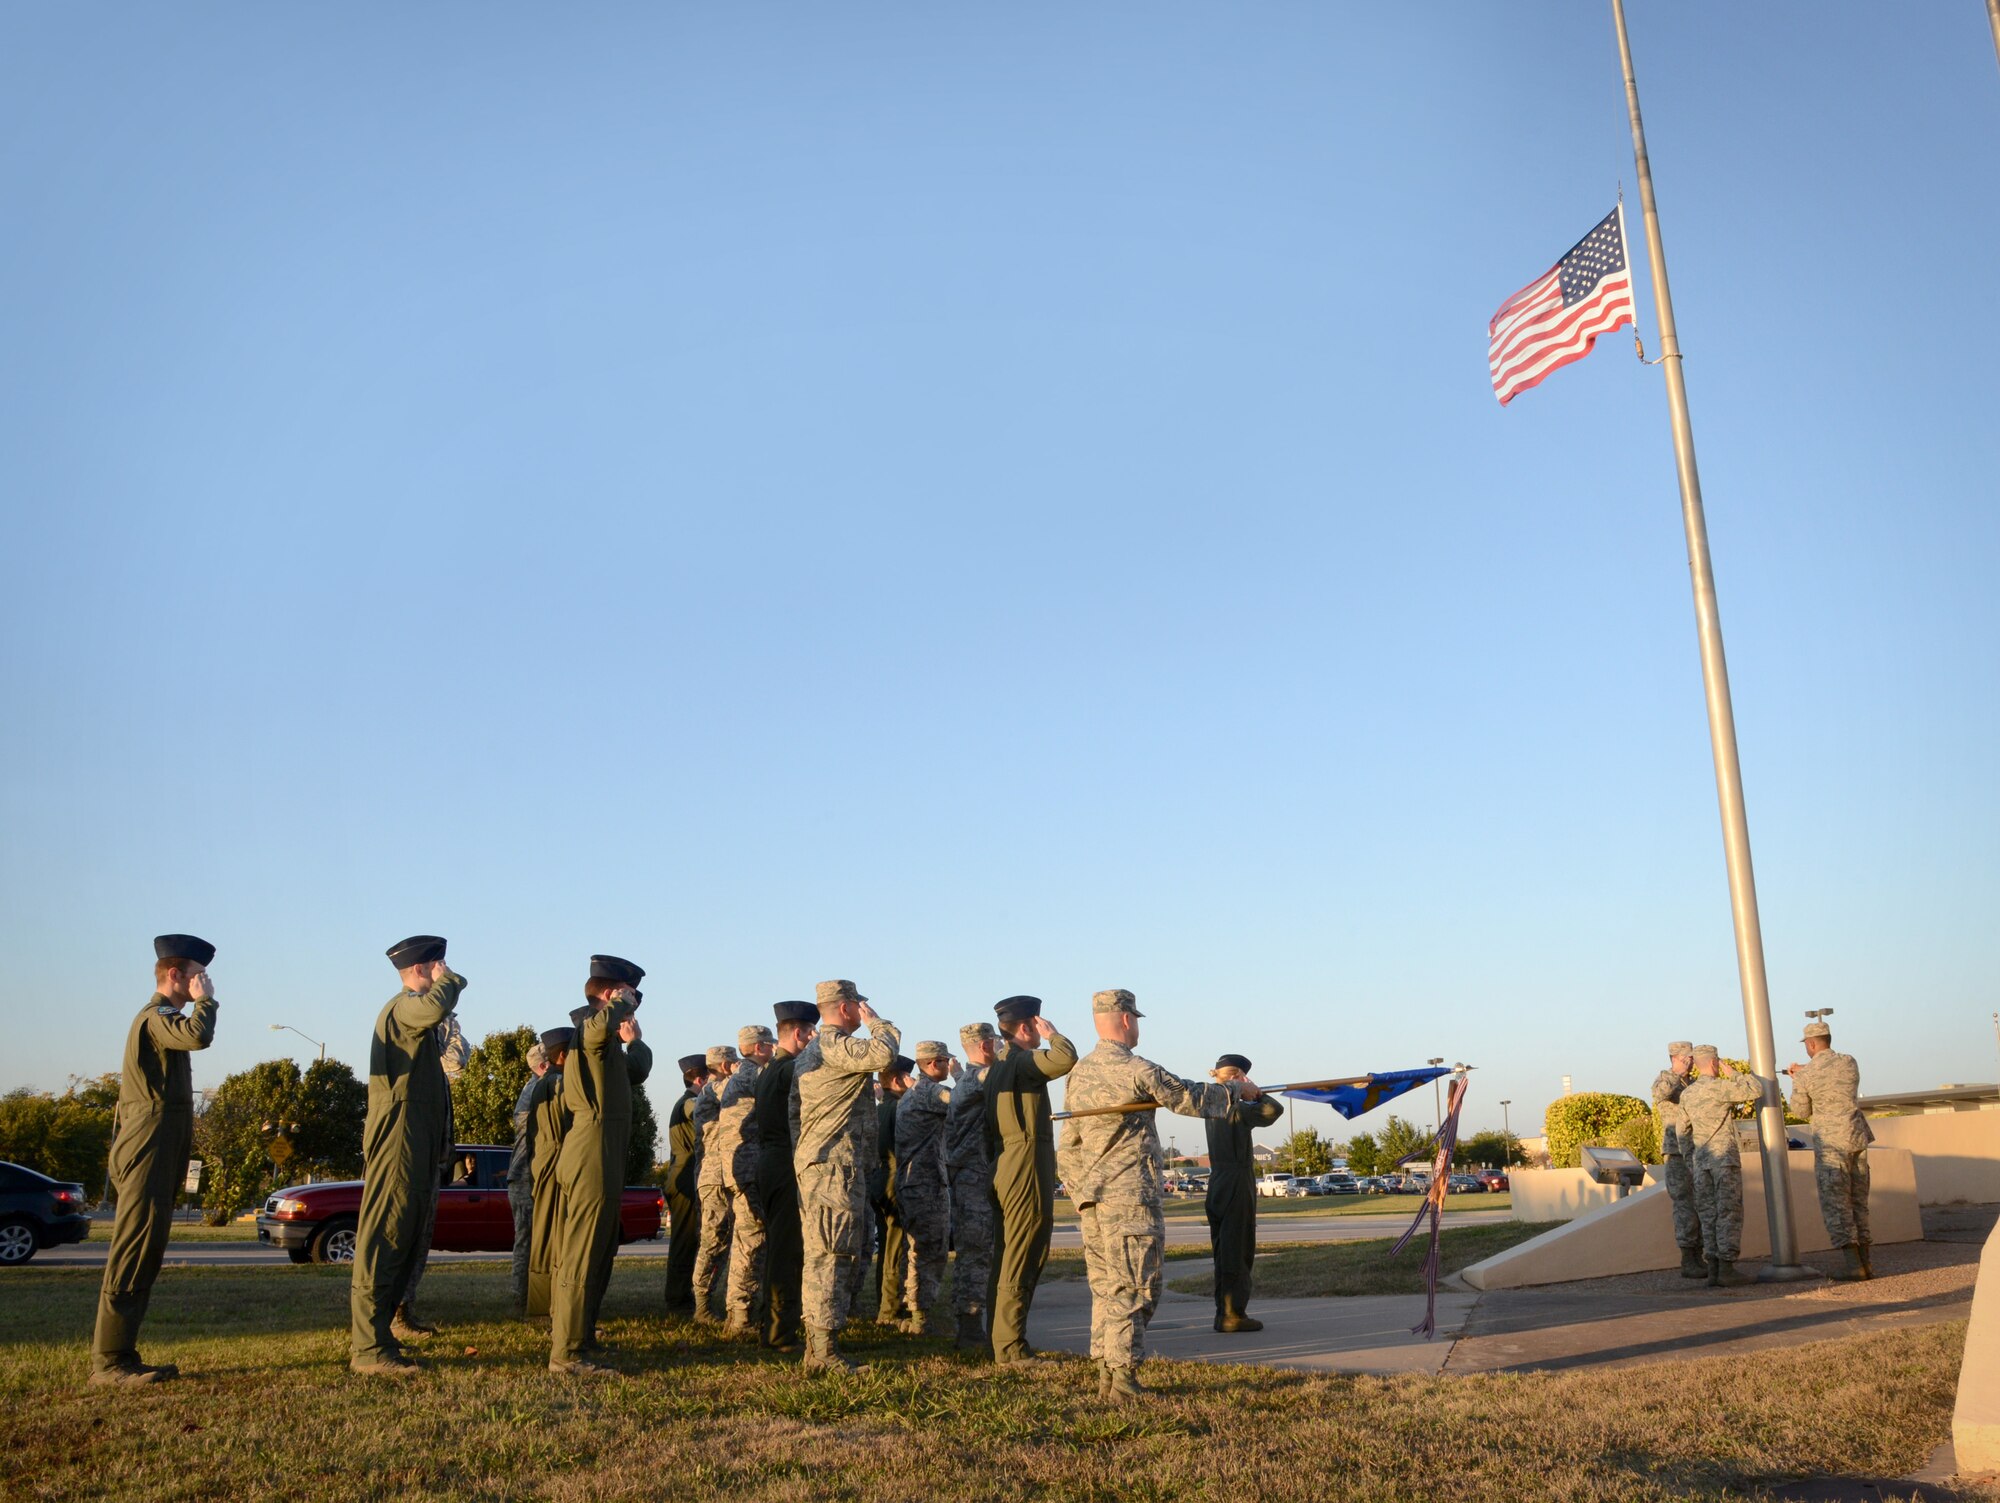 Members of the 552nd Air Control Wing’s Operations Group participated in a base retreat ceremony on Nov. 3. Led by 960th Airborne Air Control Squadron Commander Lt. Col. Kristen D. Thompson, the 24-member group stood at attention as the flag was lowered and folded by the Tinker Honor Guard. (Air Force photo by Kelly White/Released)